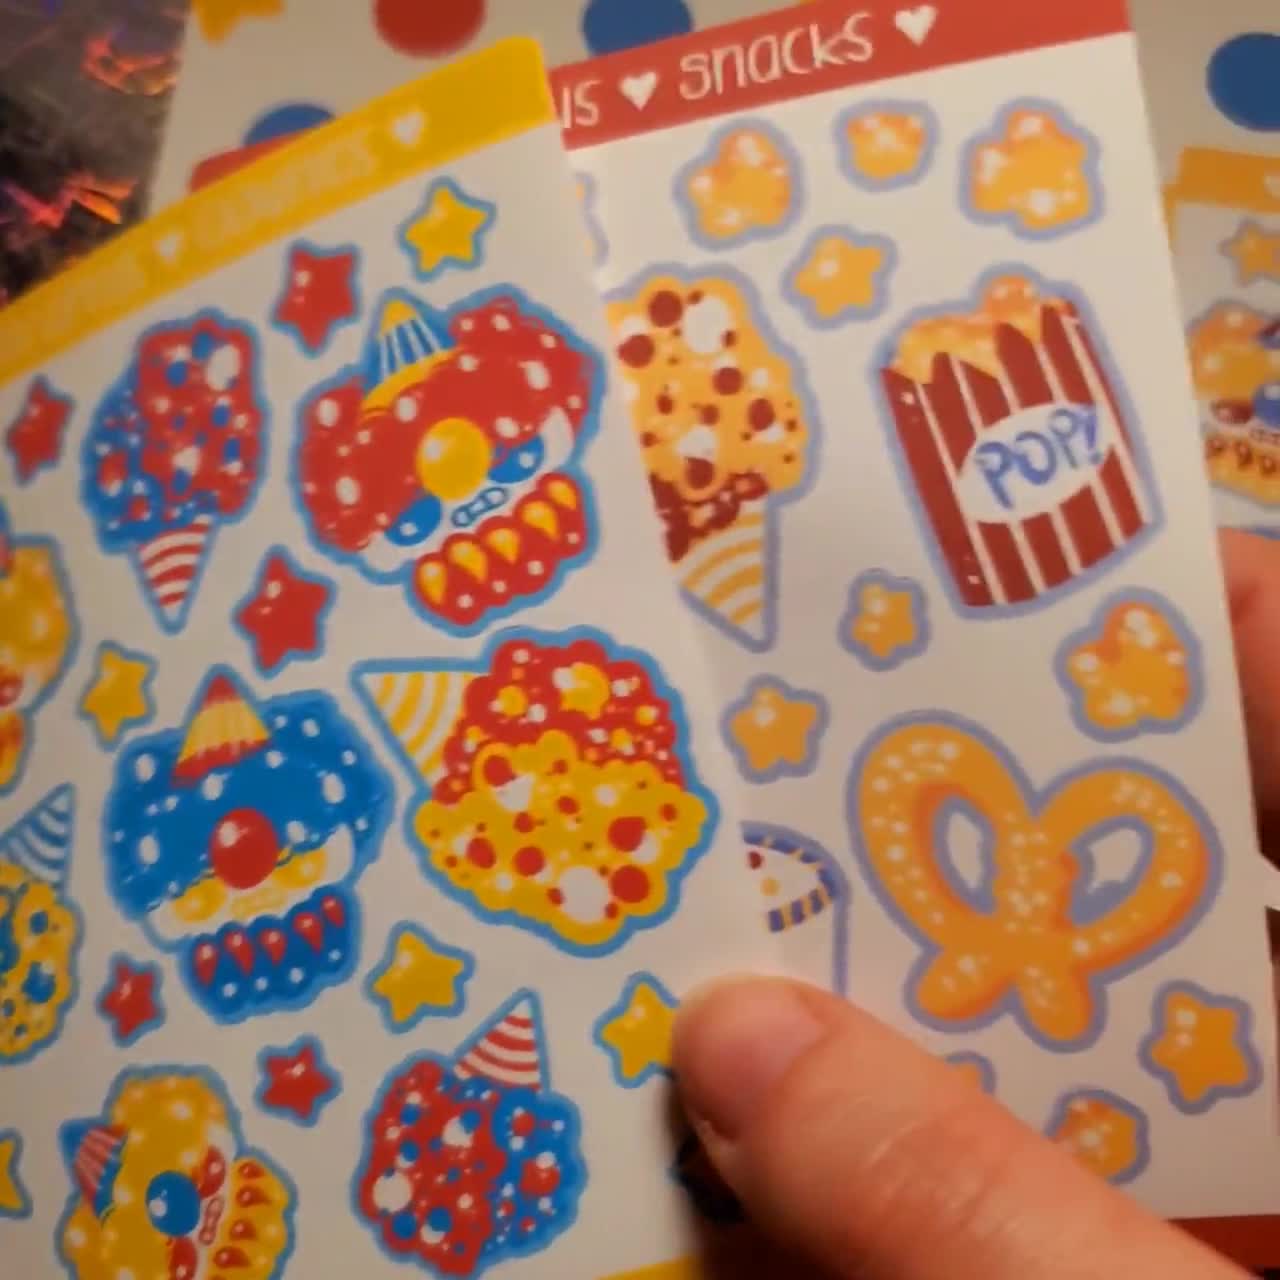 SH CIRCUS CLOWNS STICKER SHEET TOY SPECIAL NEW CLOSEOUT 